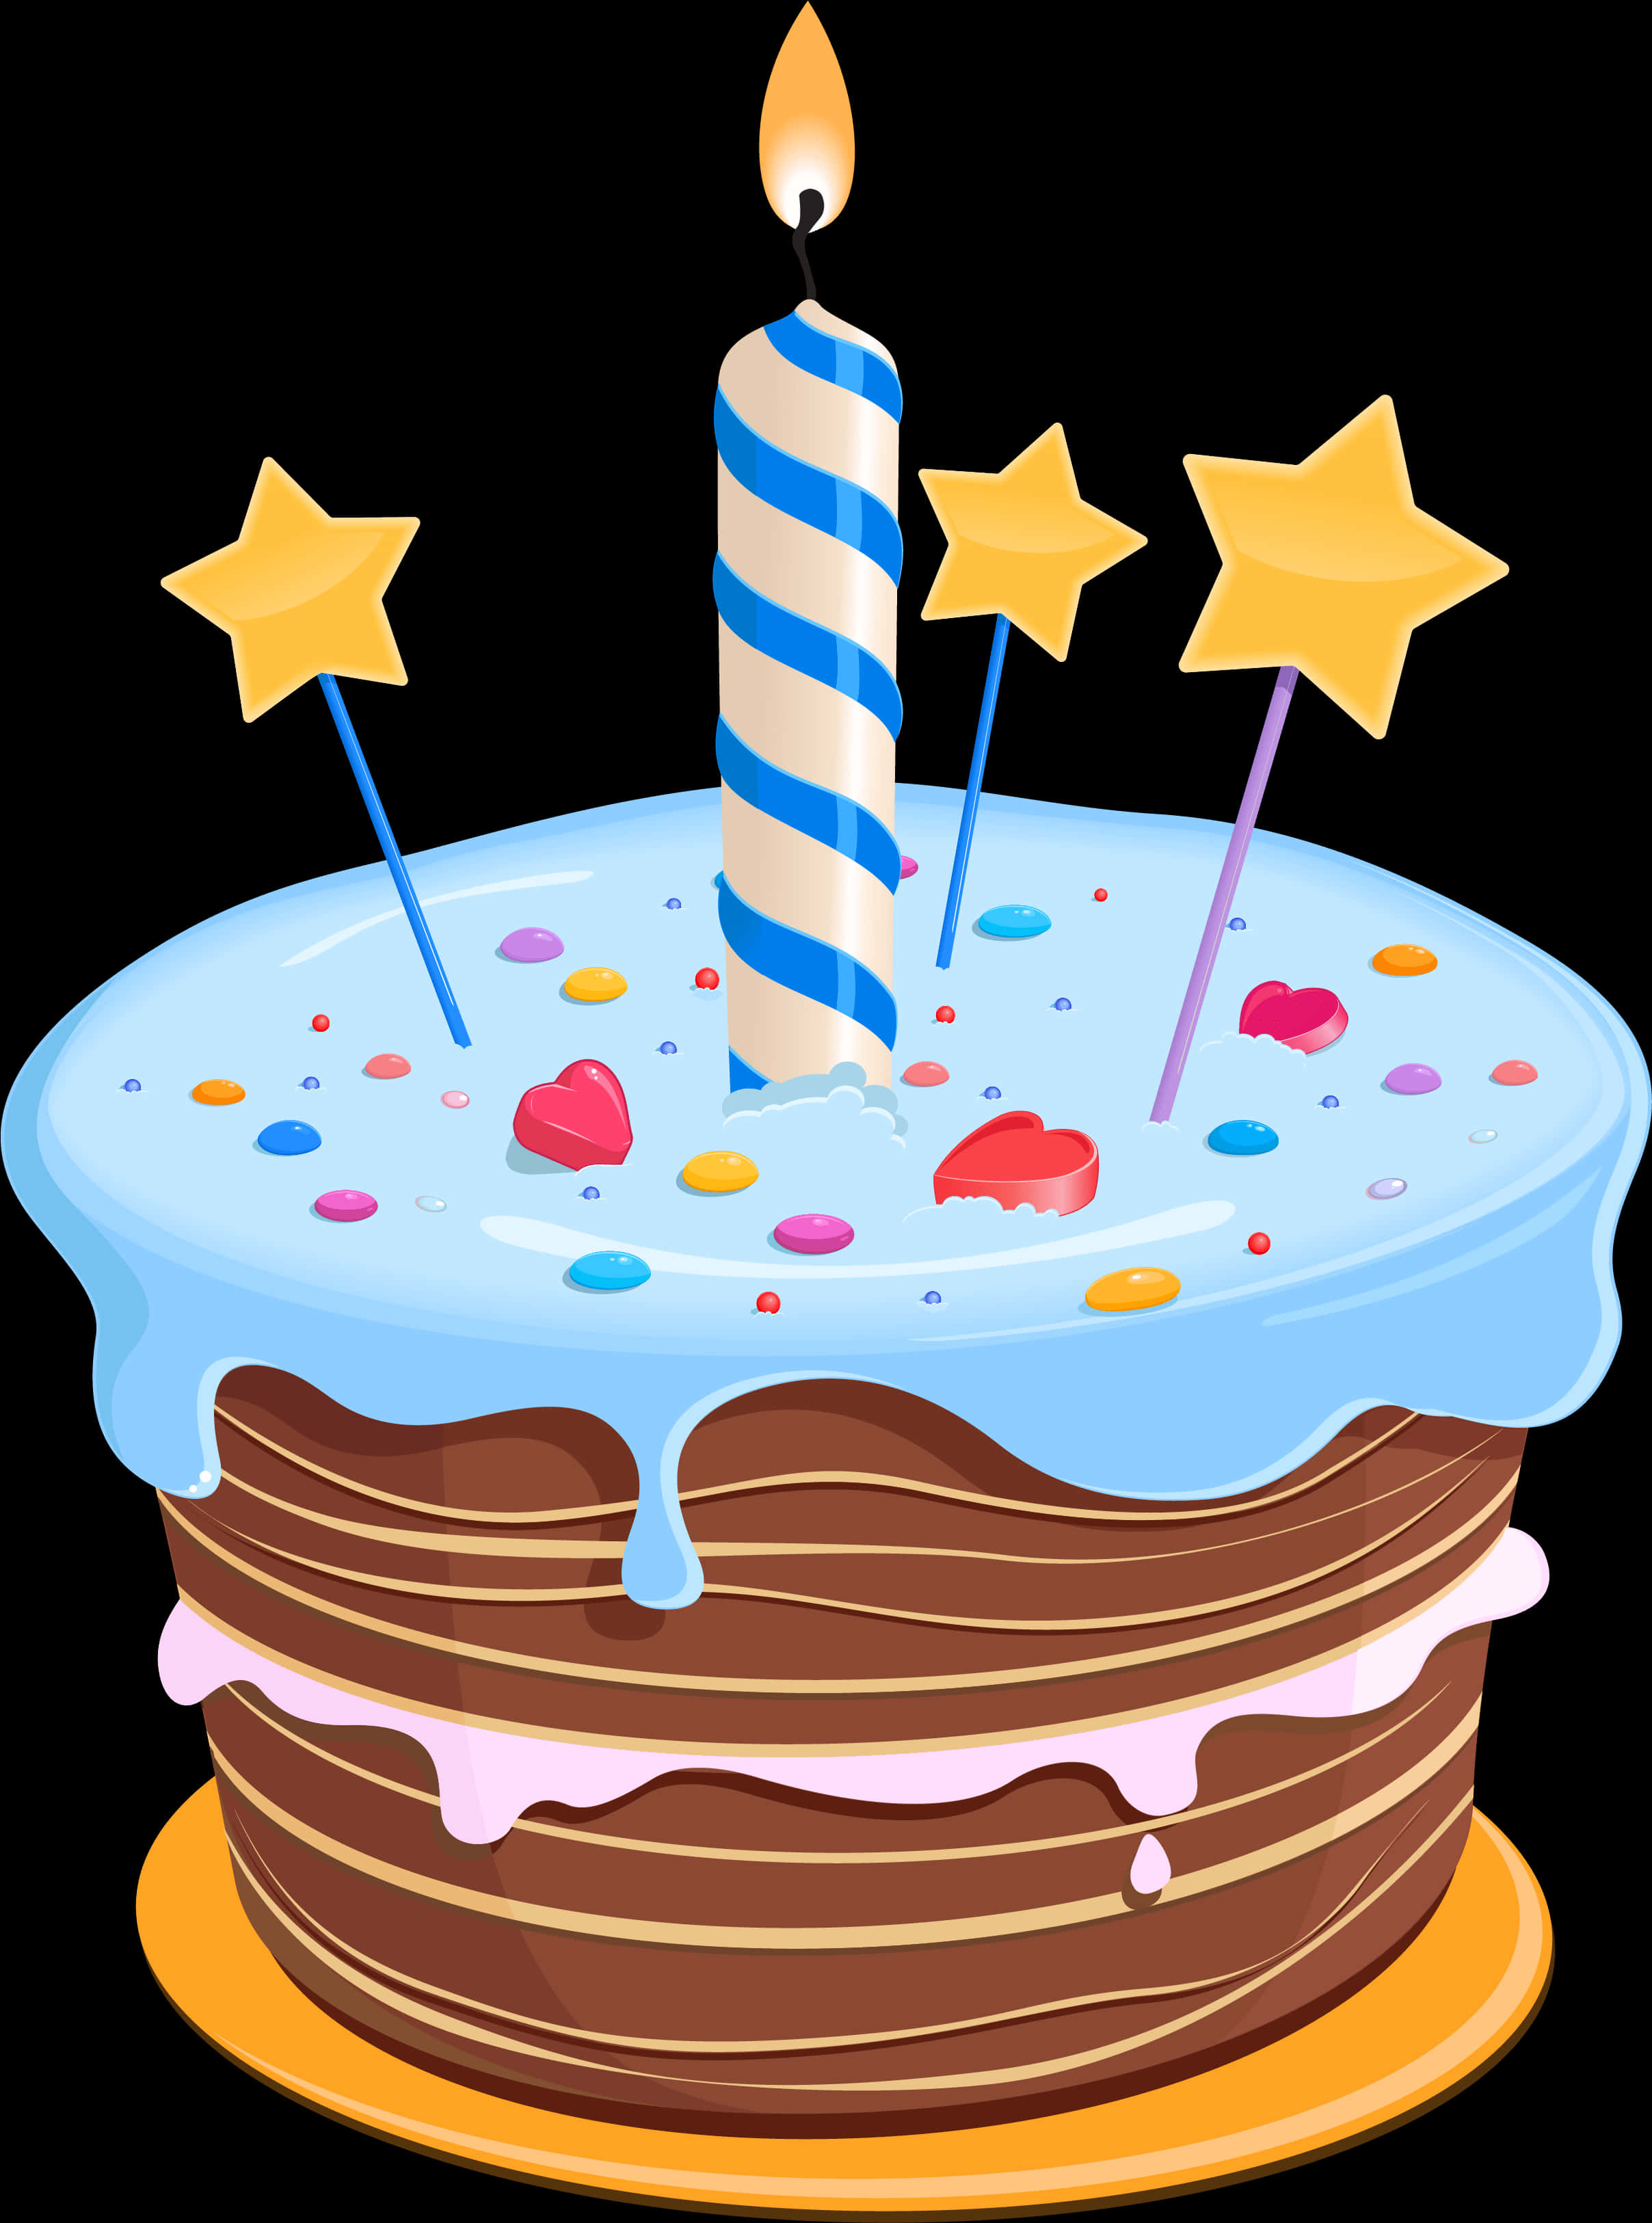 Celebratory Birthday Cakewith Candleand Stars PNG image